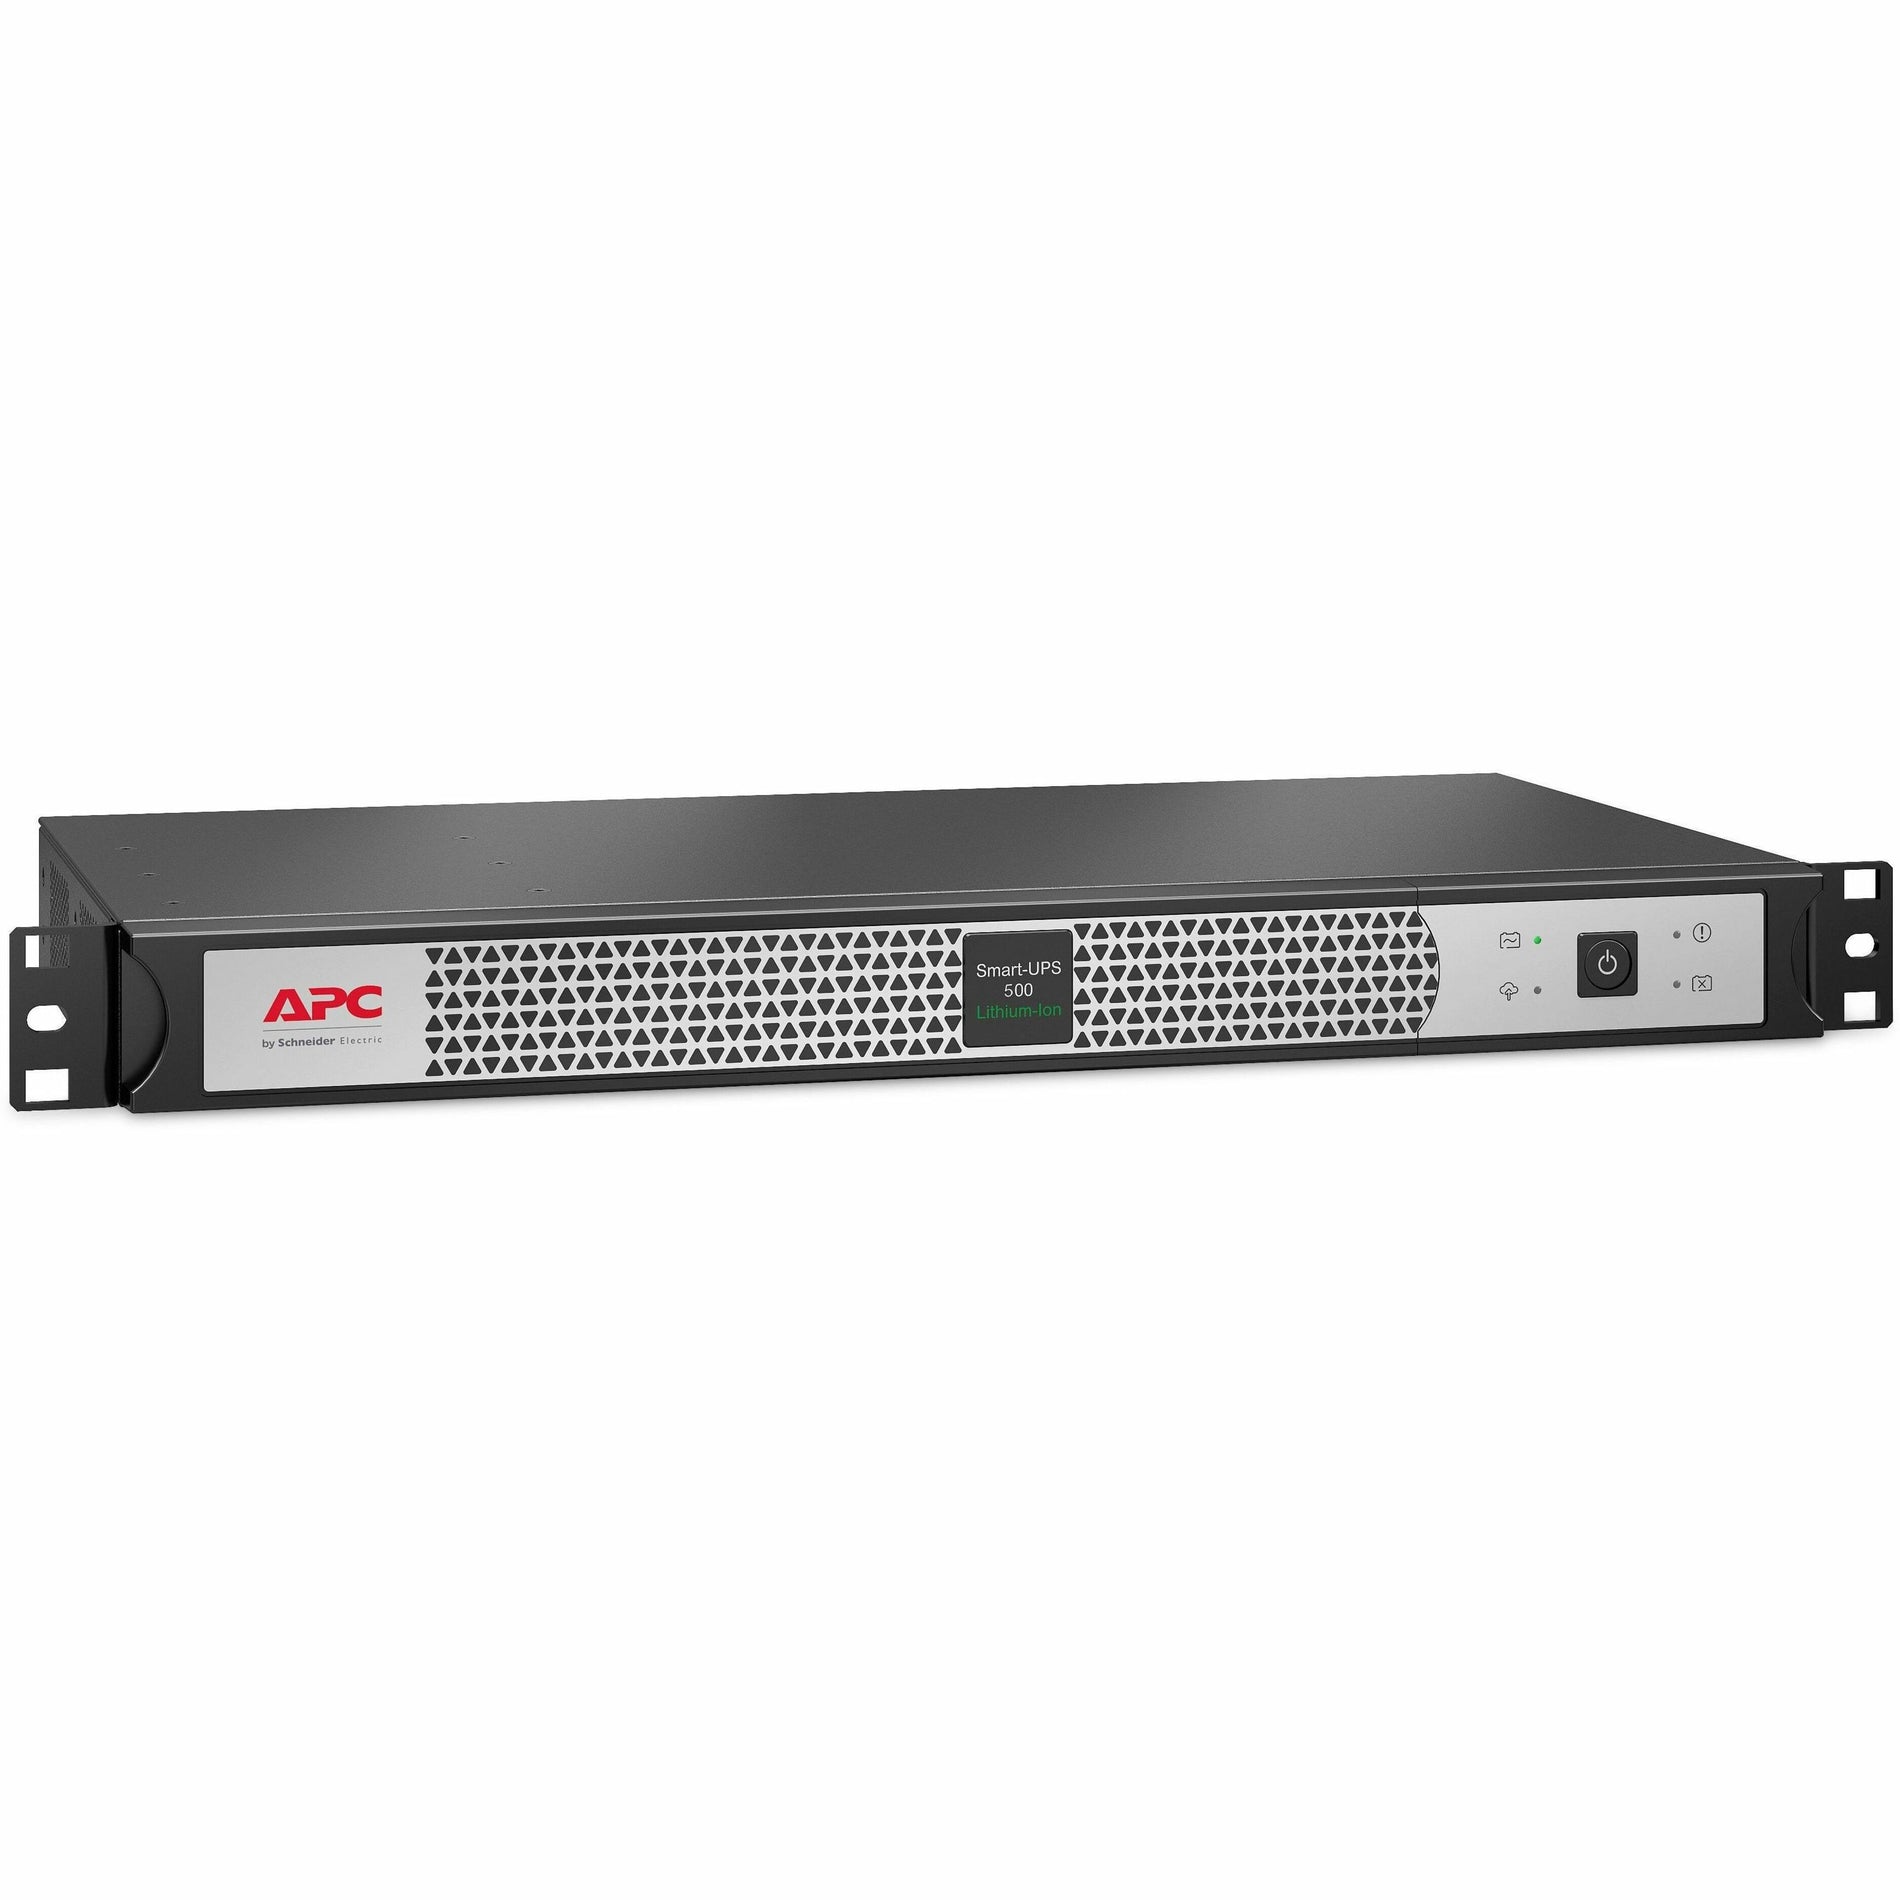 APC SCL500RM1UNC Smart-UPS 500VA Rack-mountable UPS, 5 Year Warranty, Energy Star, USB and Serial Port, 120V AC Input Voltage, 500 VA/400 W Load Capacity, Lithium Ion Battery, 2.70 Minute Backup/Run Time